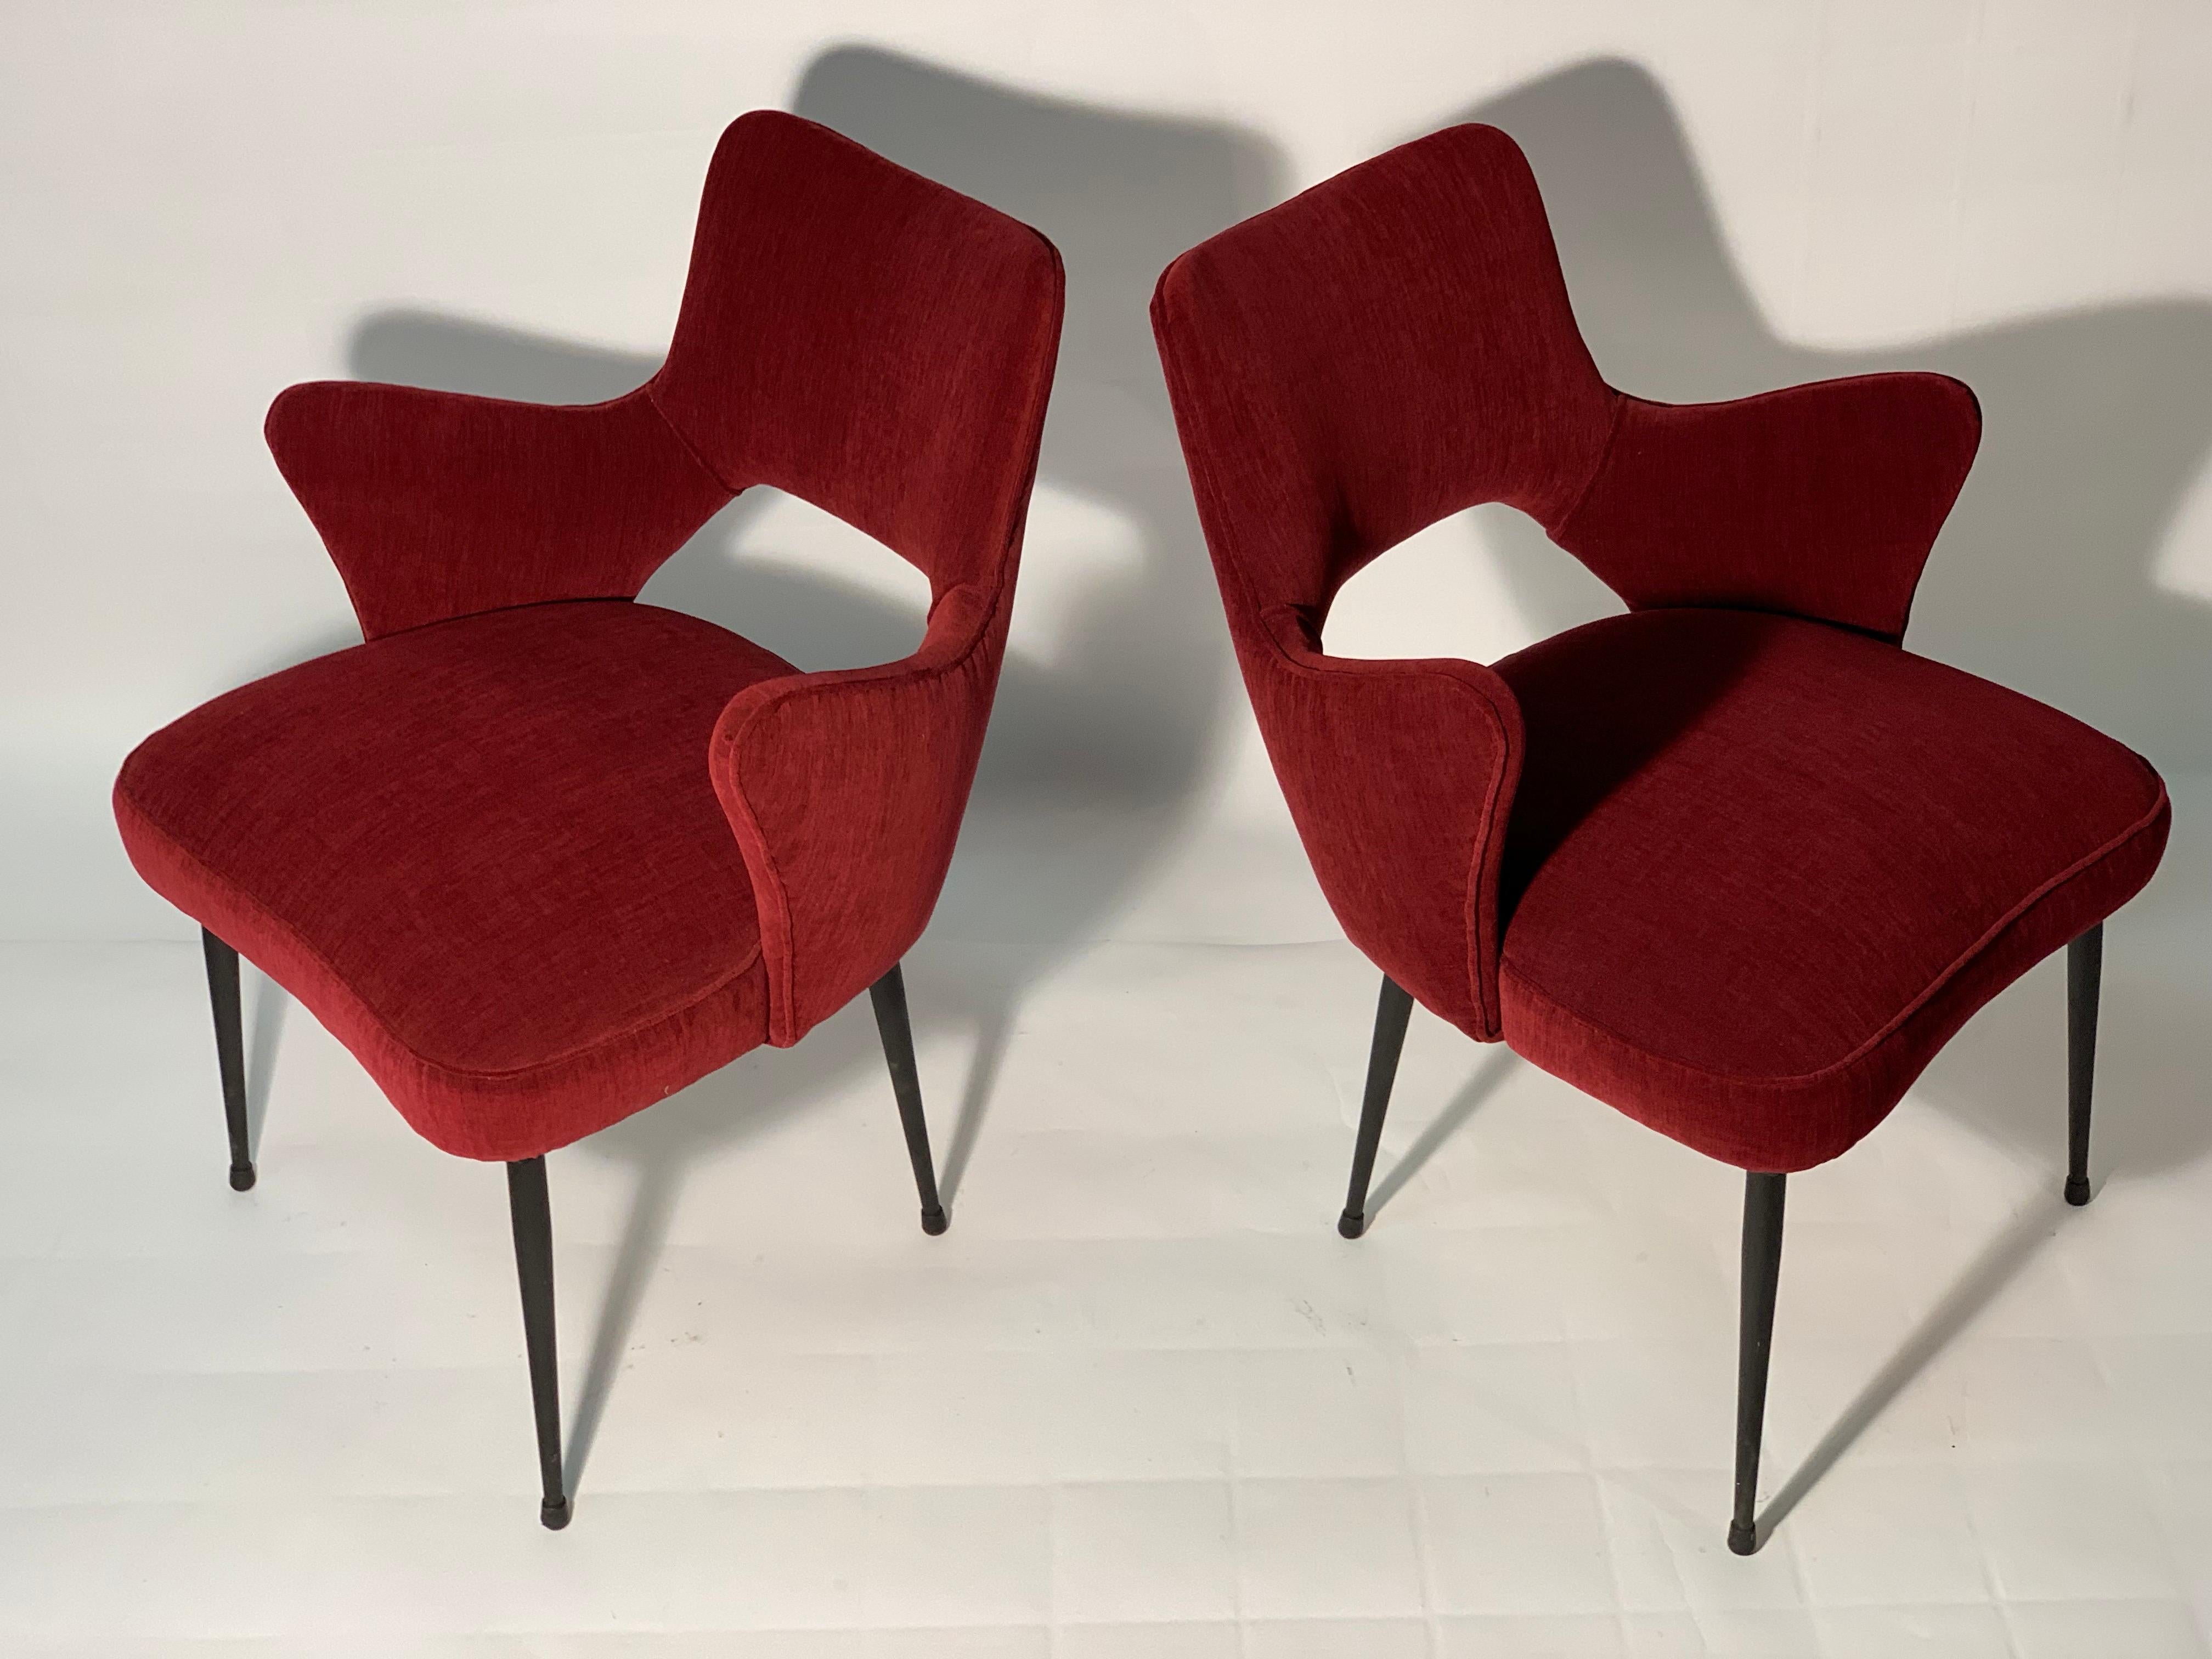 Pair of chairs with a sinuous shape covered with a new soft red cotton fabric similar to a velvet, shaped and rounded armrests, shaped seat and concave back with a hole in the lower part.
Slim legs that are lowered towards the bottom in black